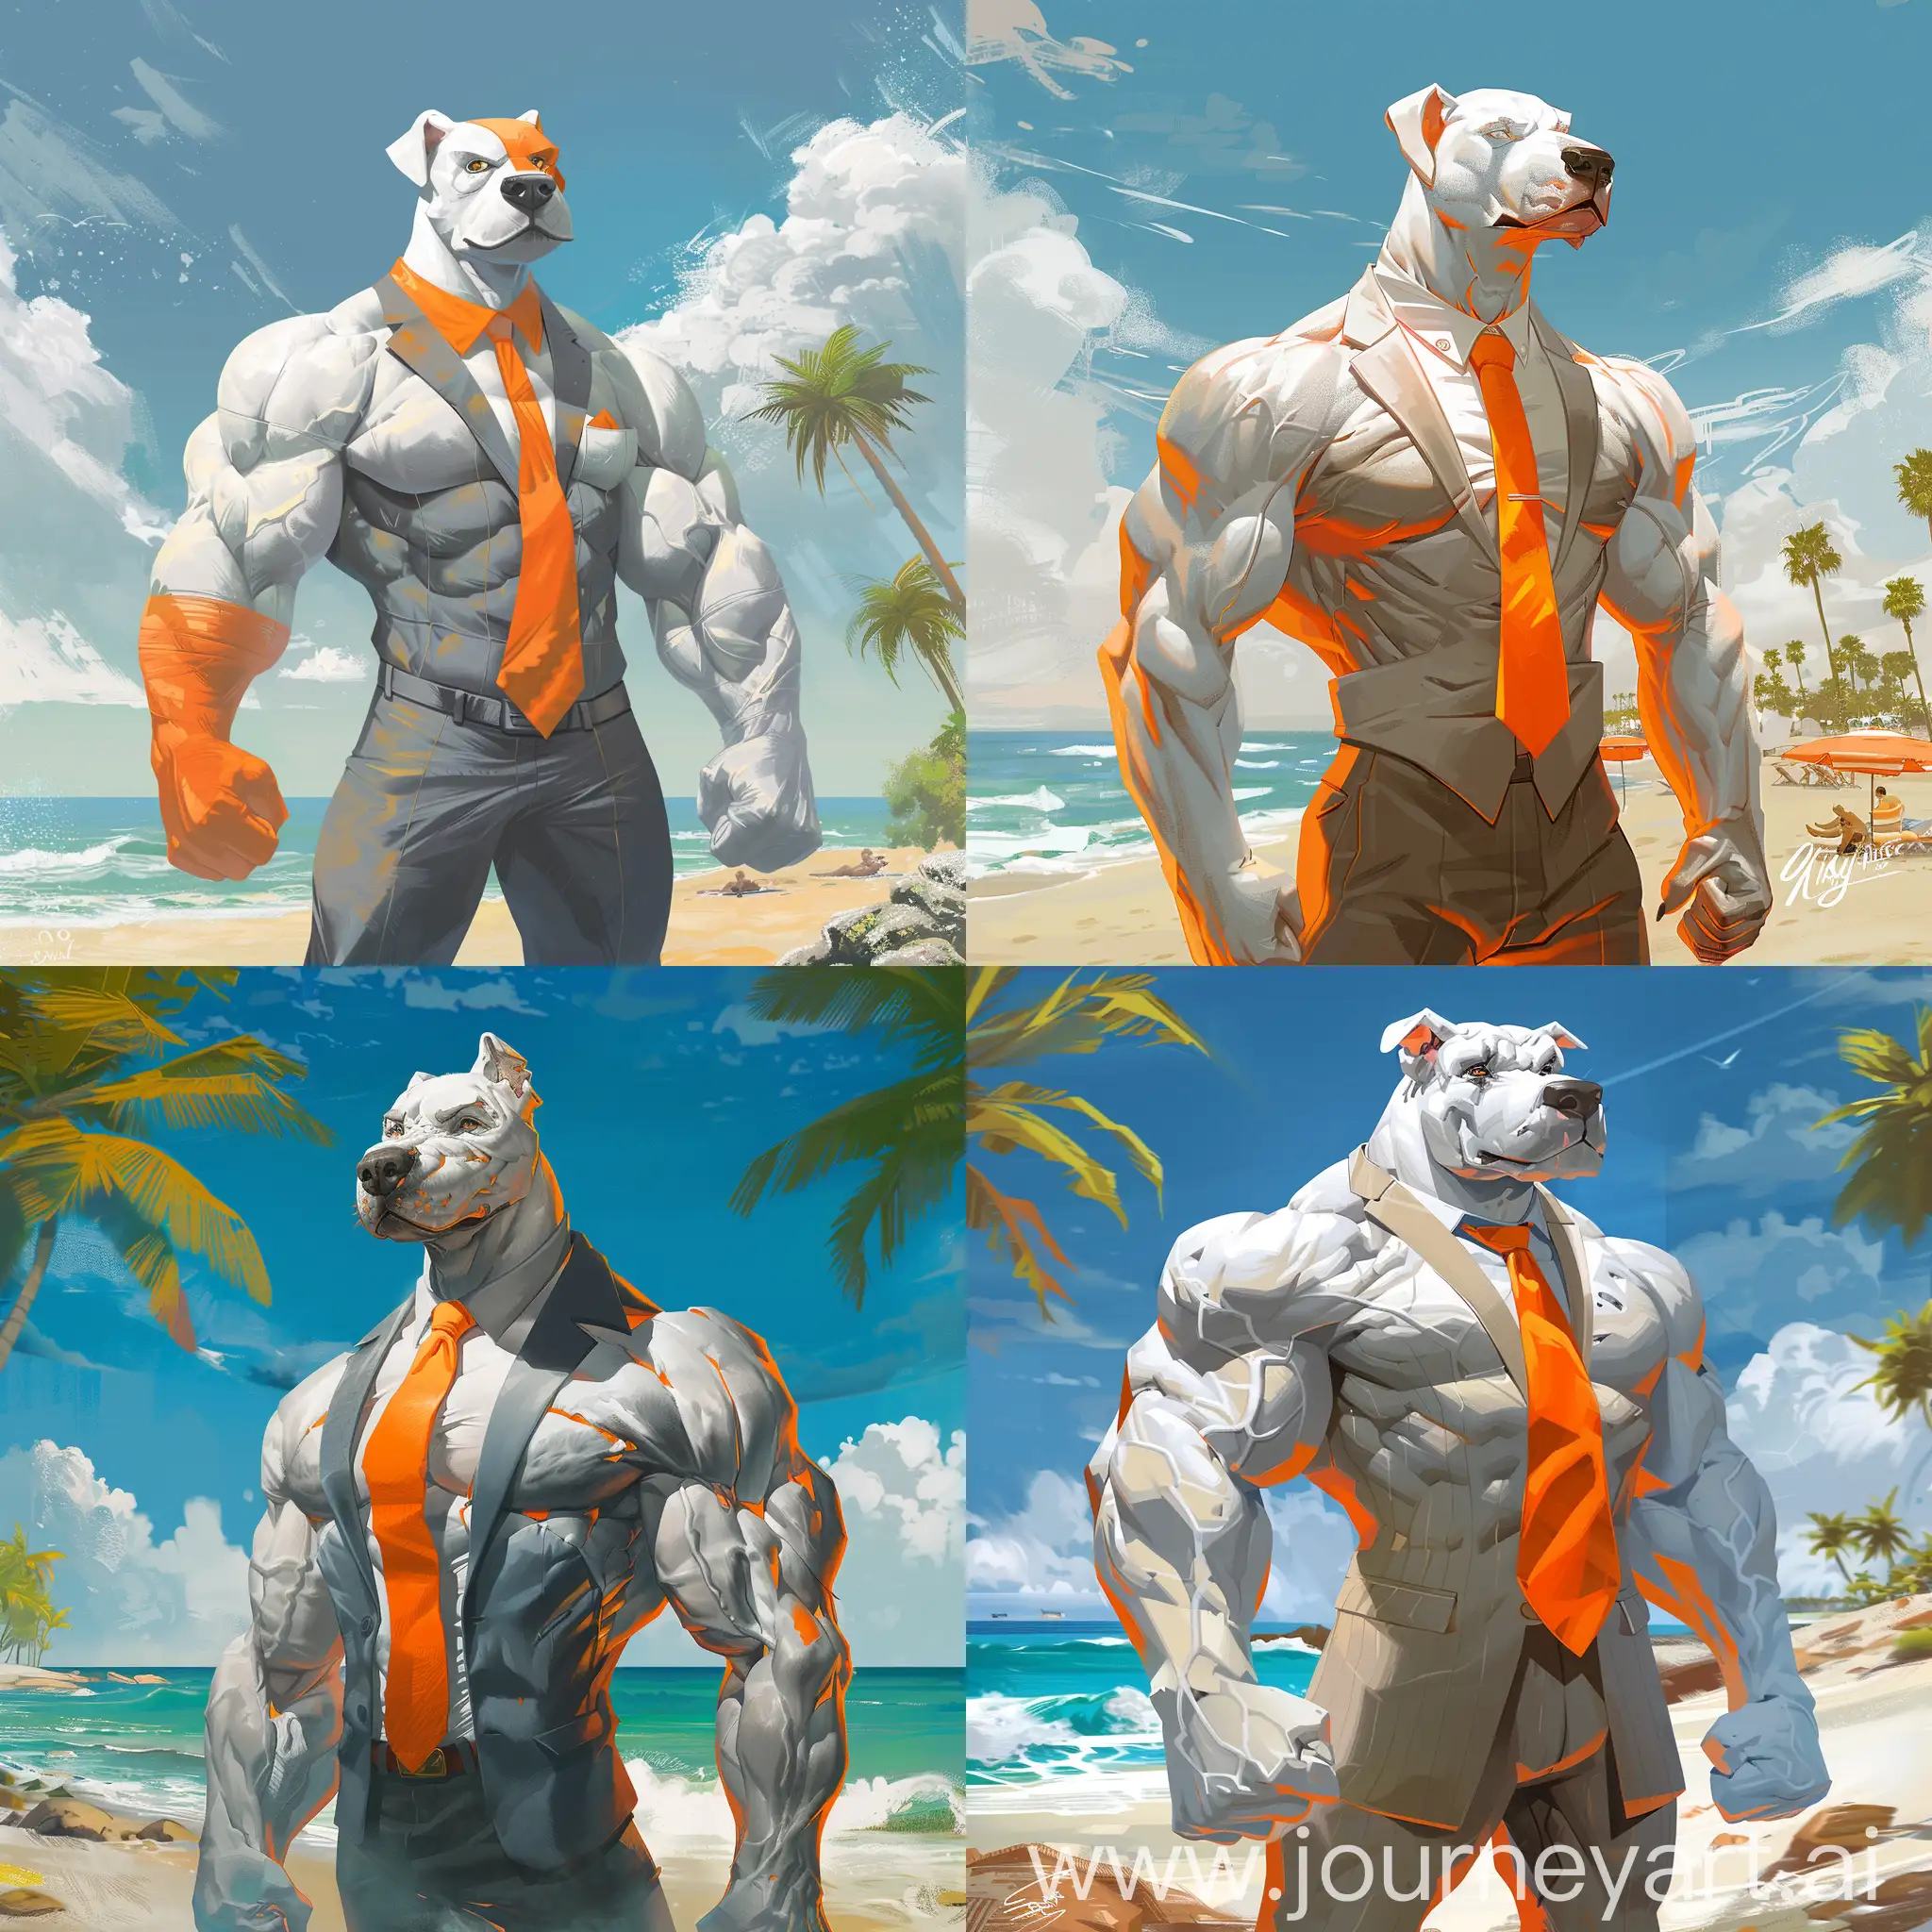 Create a high-definition illustration of a muscular anthropomorphic dog that appears 90%20human, featuring an orange and white color scheme. The character, dressed in a business suit with an orange tie, stands confidently on a beach. This character should emanate a strong, confident aura, resembling that of a bodybuilder, and adopt a pose that indicates leadership and power. The beach environment should be depicted with clear skies, gentle waves at the shore, and palm trees in the background, capturing the essence of the character's commanding yet relaxed presence, with attention to the detailed color palette and attire.